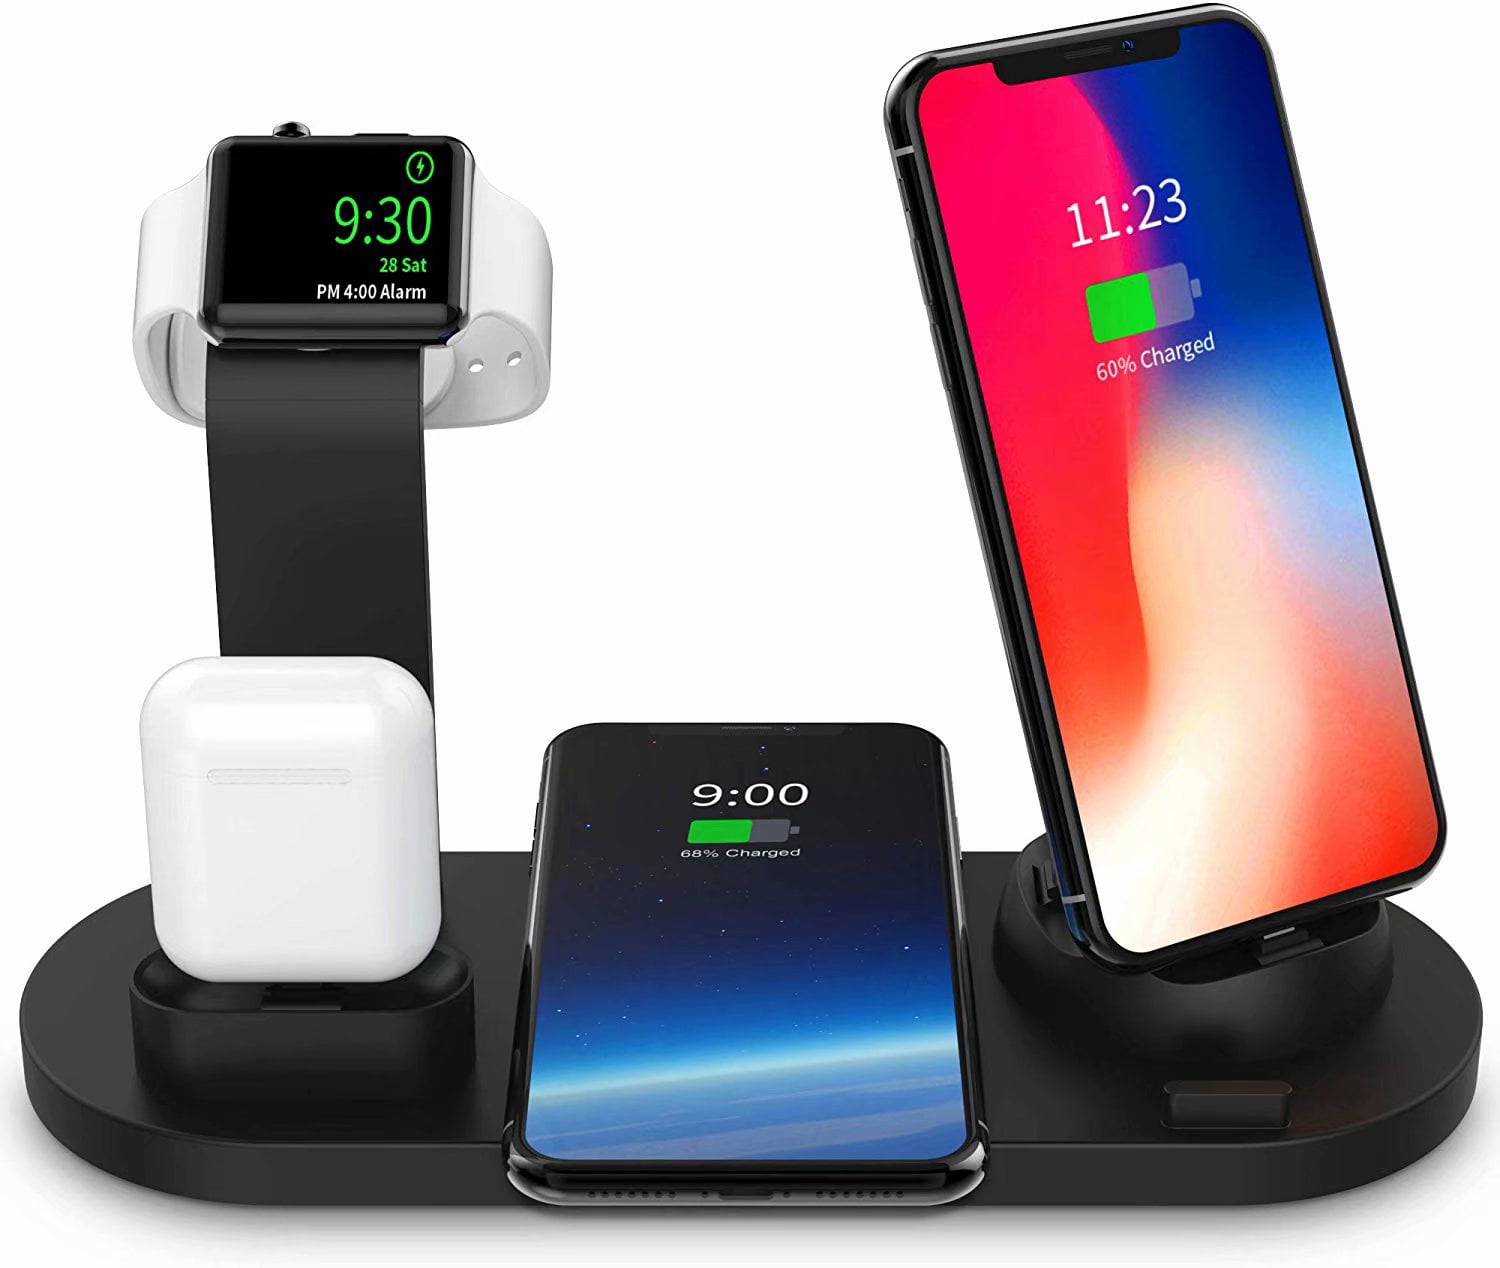 Cyber Monday Wireless Charger 4 In 1 Wireless Charging Stand For Apple Watch And Airpod Charging Station For Multiple Devices Qi Fast Charging Dock For Iphone Samsung Walmart Com Walmart Com